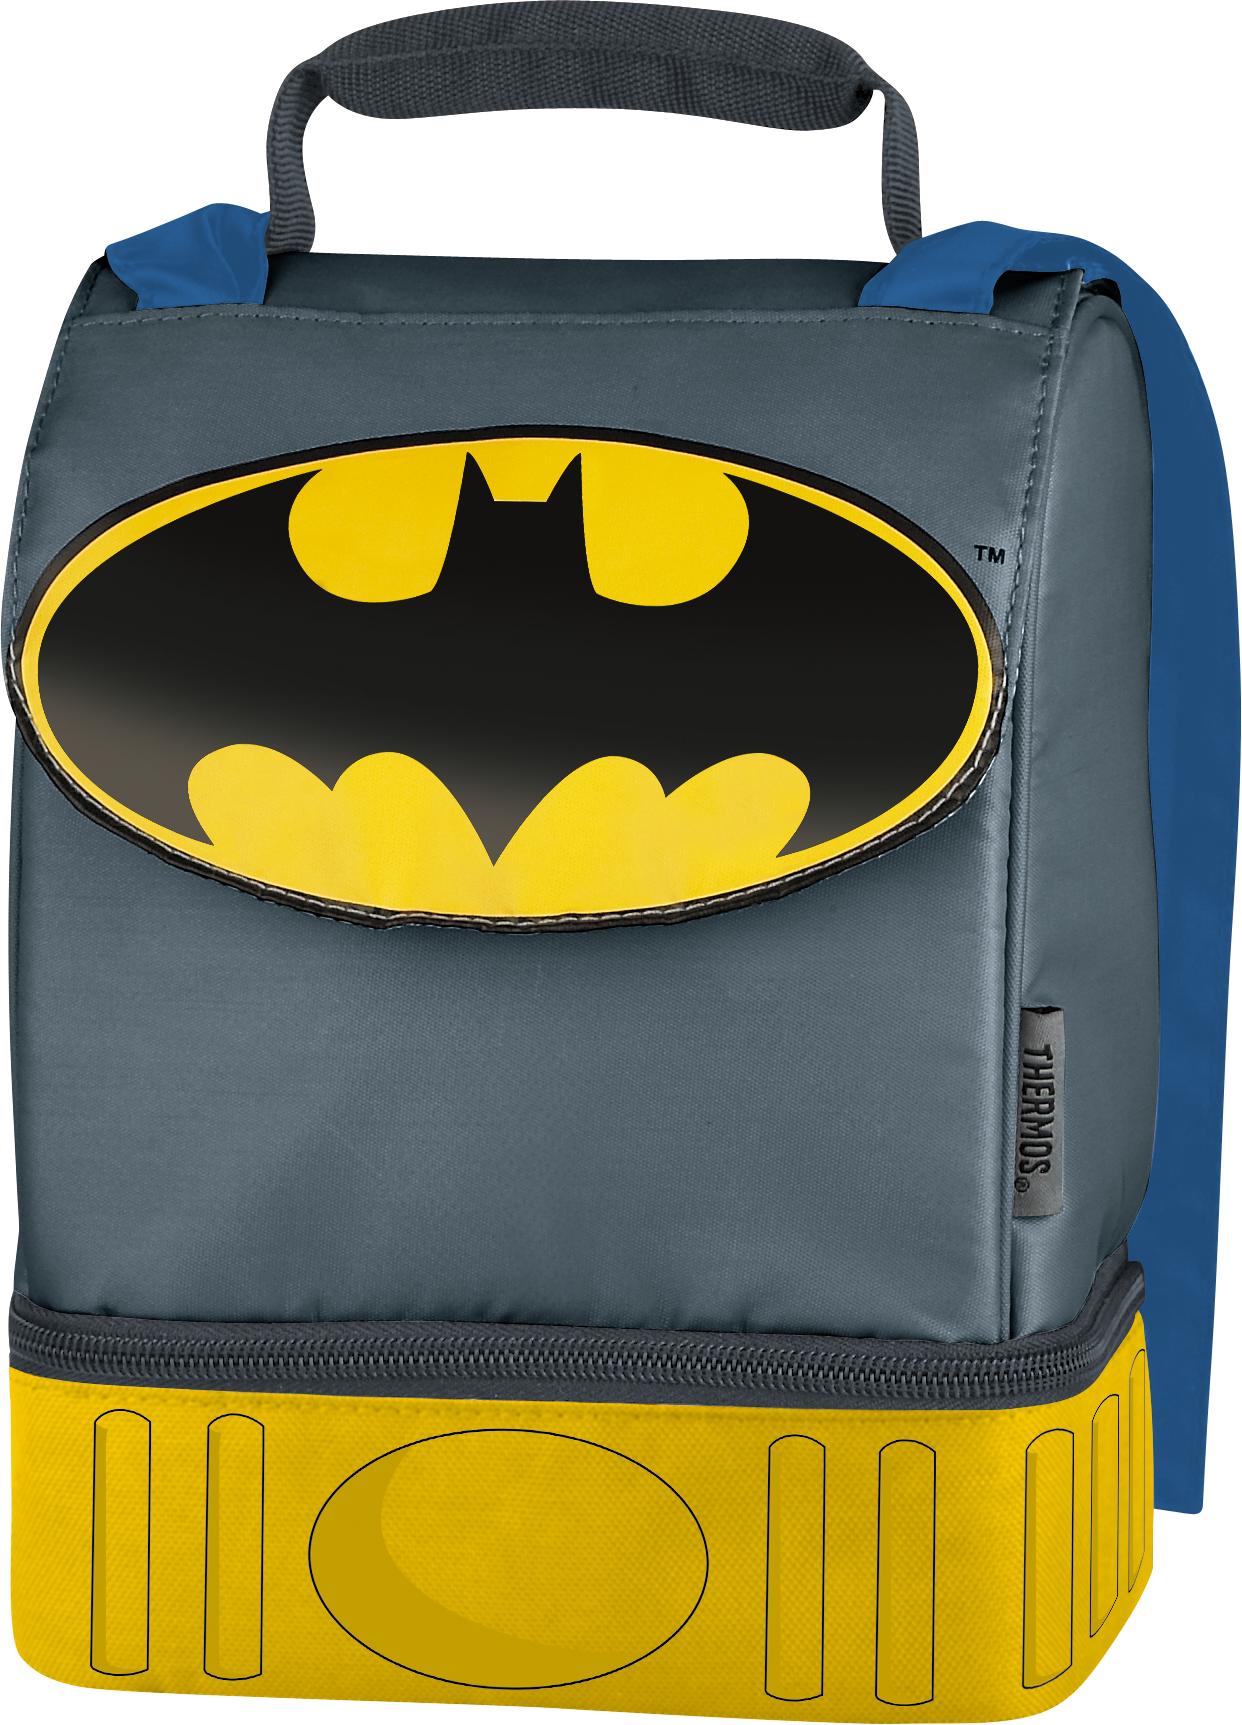 Over The Weekend, The Schedule - Thermos Dual Compartment Lunch Kit, Batman (1242x1725)